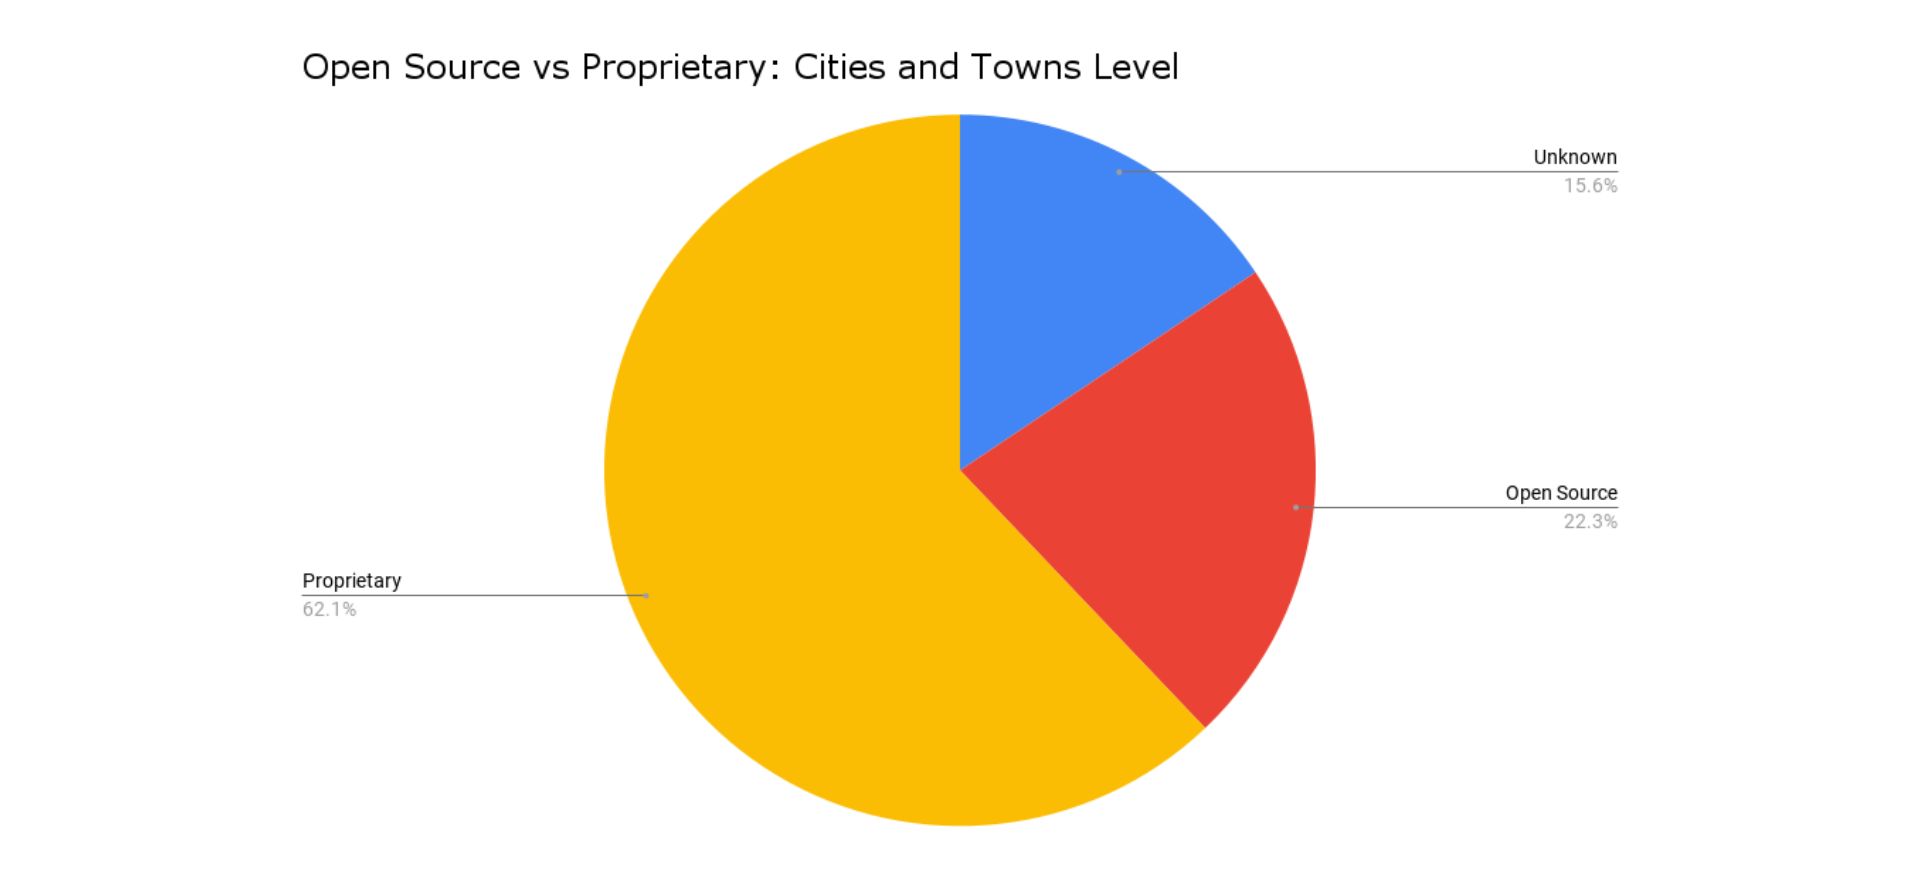 Open source vs proprietary: cities and towns level